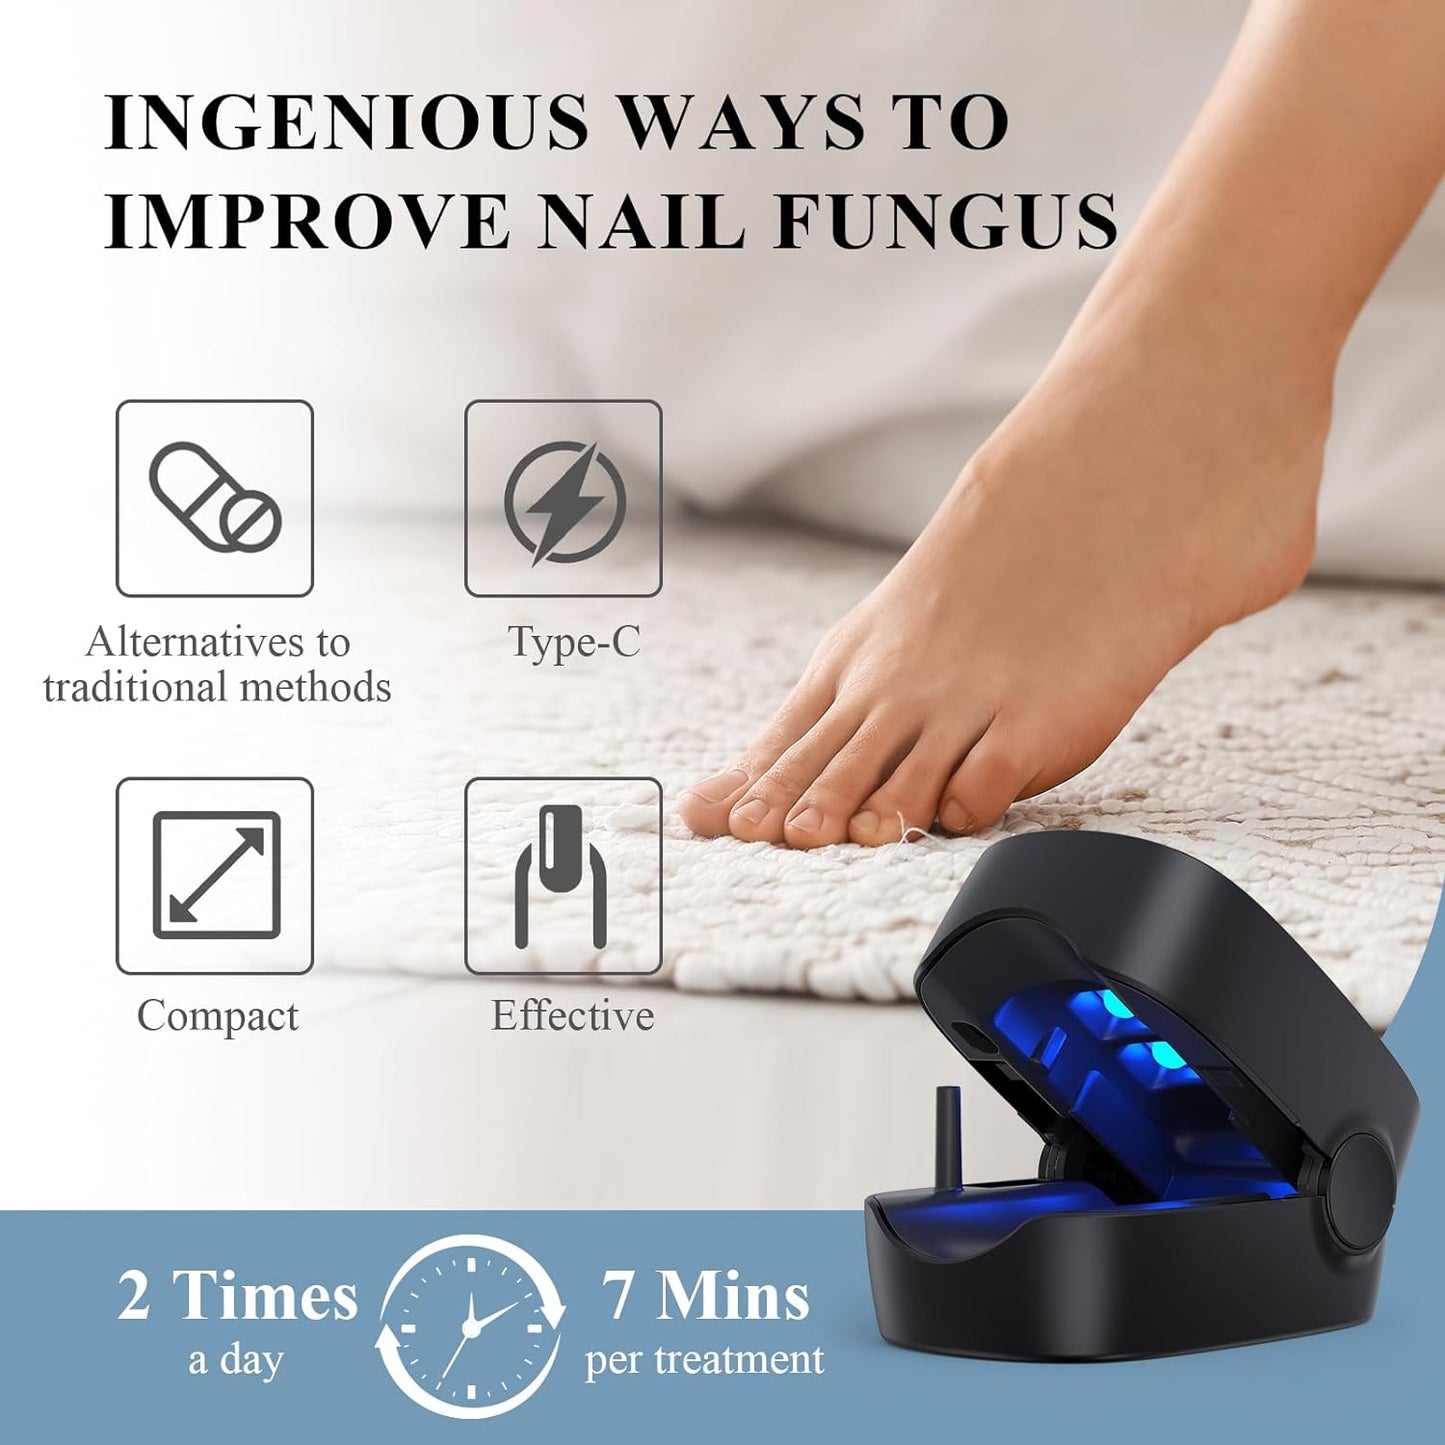 Jinta Nail Fungus Cleaning Laser Device, Nail Fungus Treatment for Fingernails and Toenails with Onychomycosis, Effectively Improve Damaged, Discolored and Thickened Nails, Suitable for Home Use